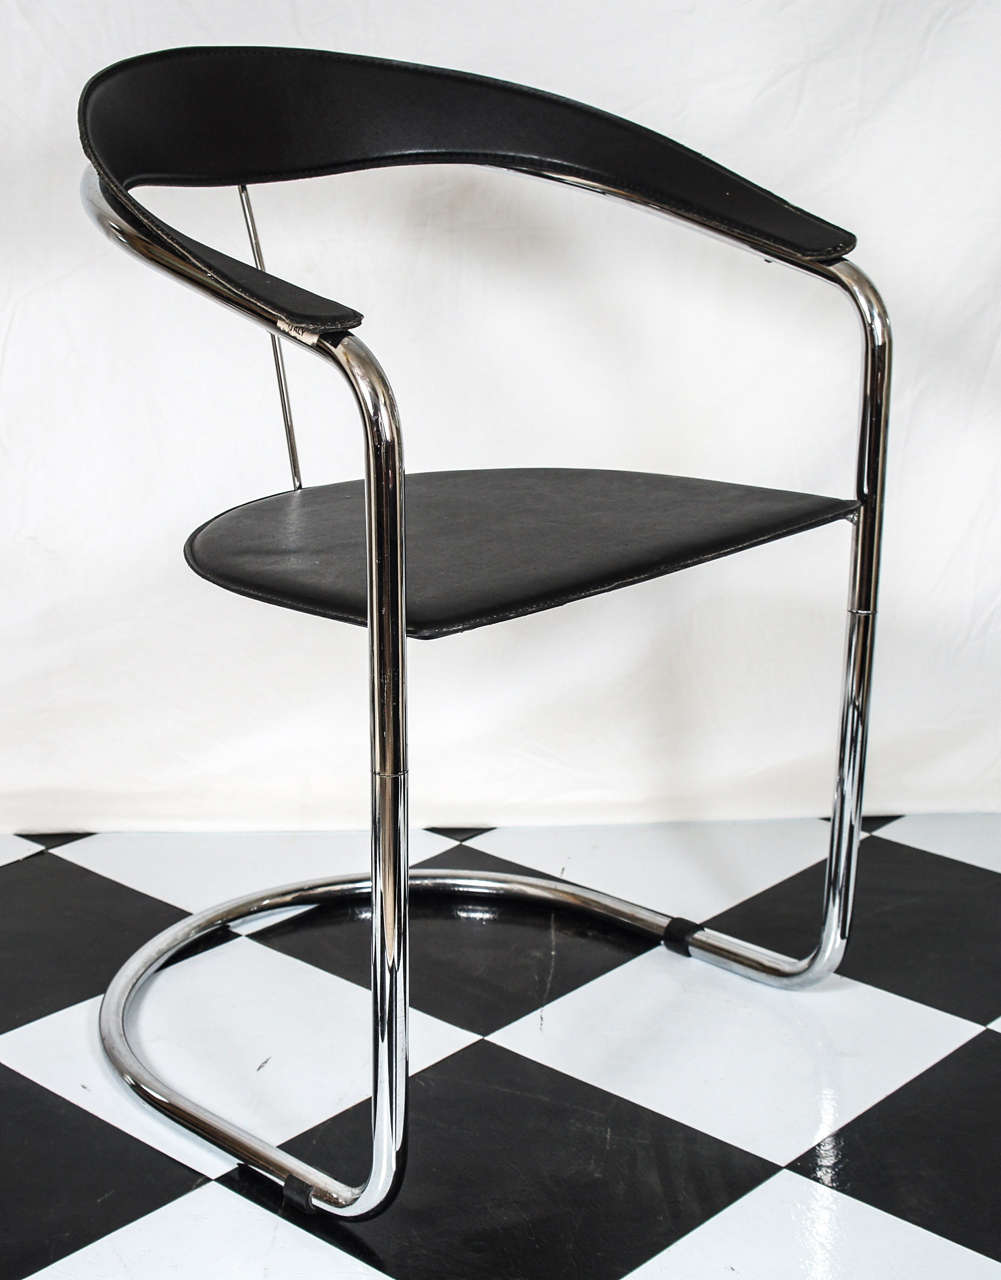 Italian Pair of Fasem Chrome and Leather Chairs by Giancarlo Vegni